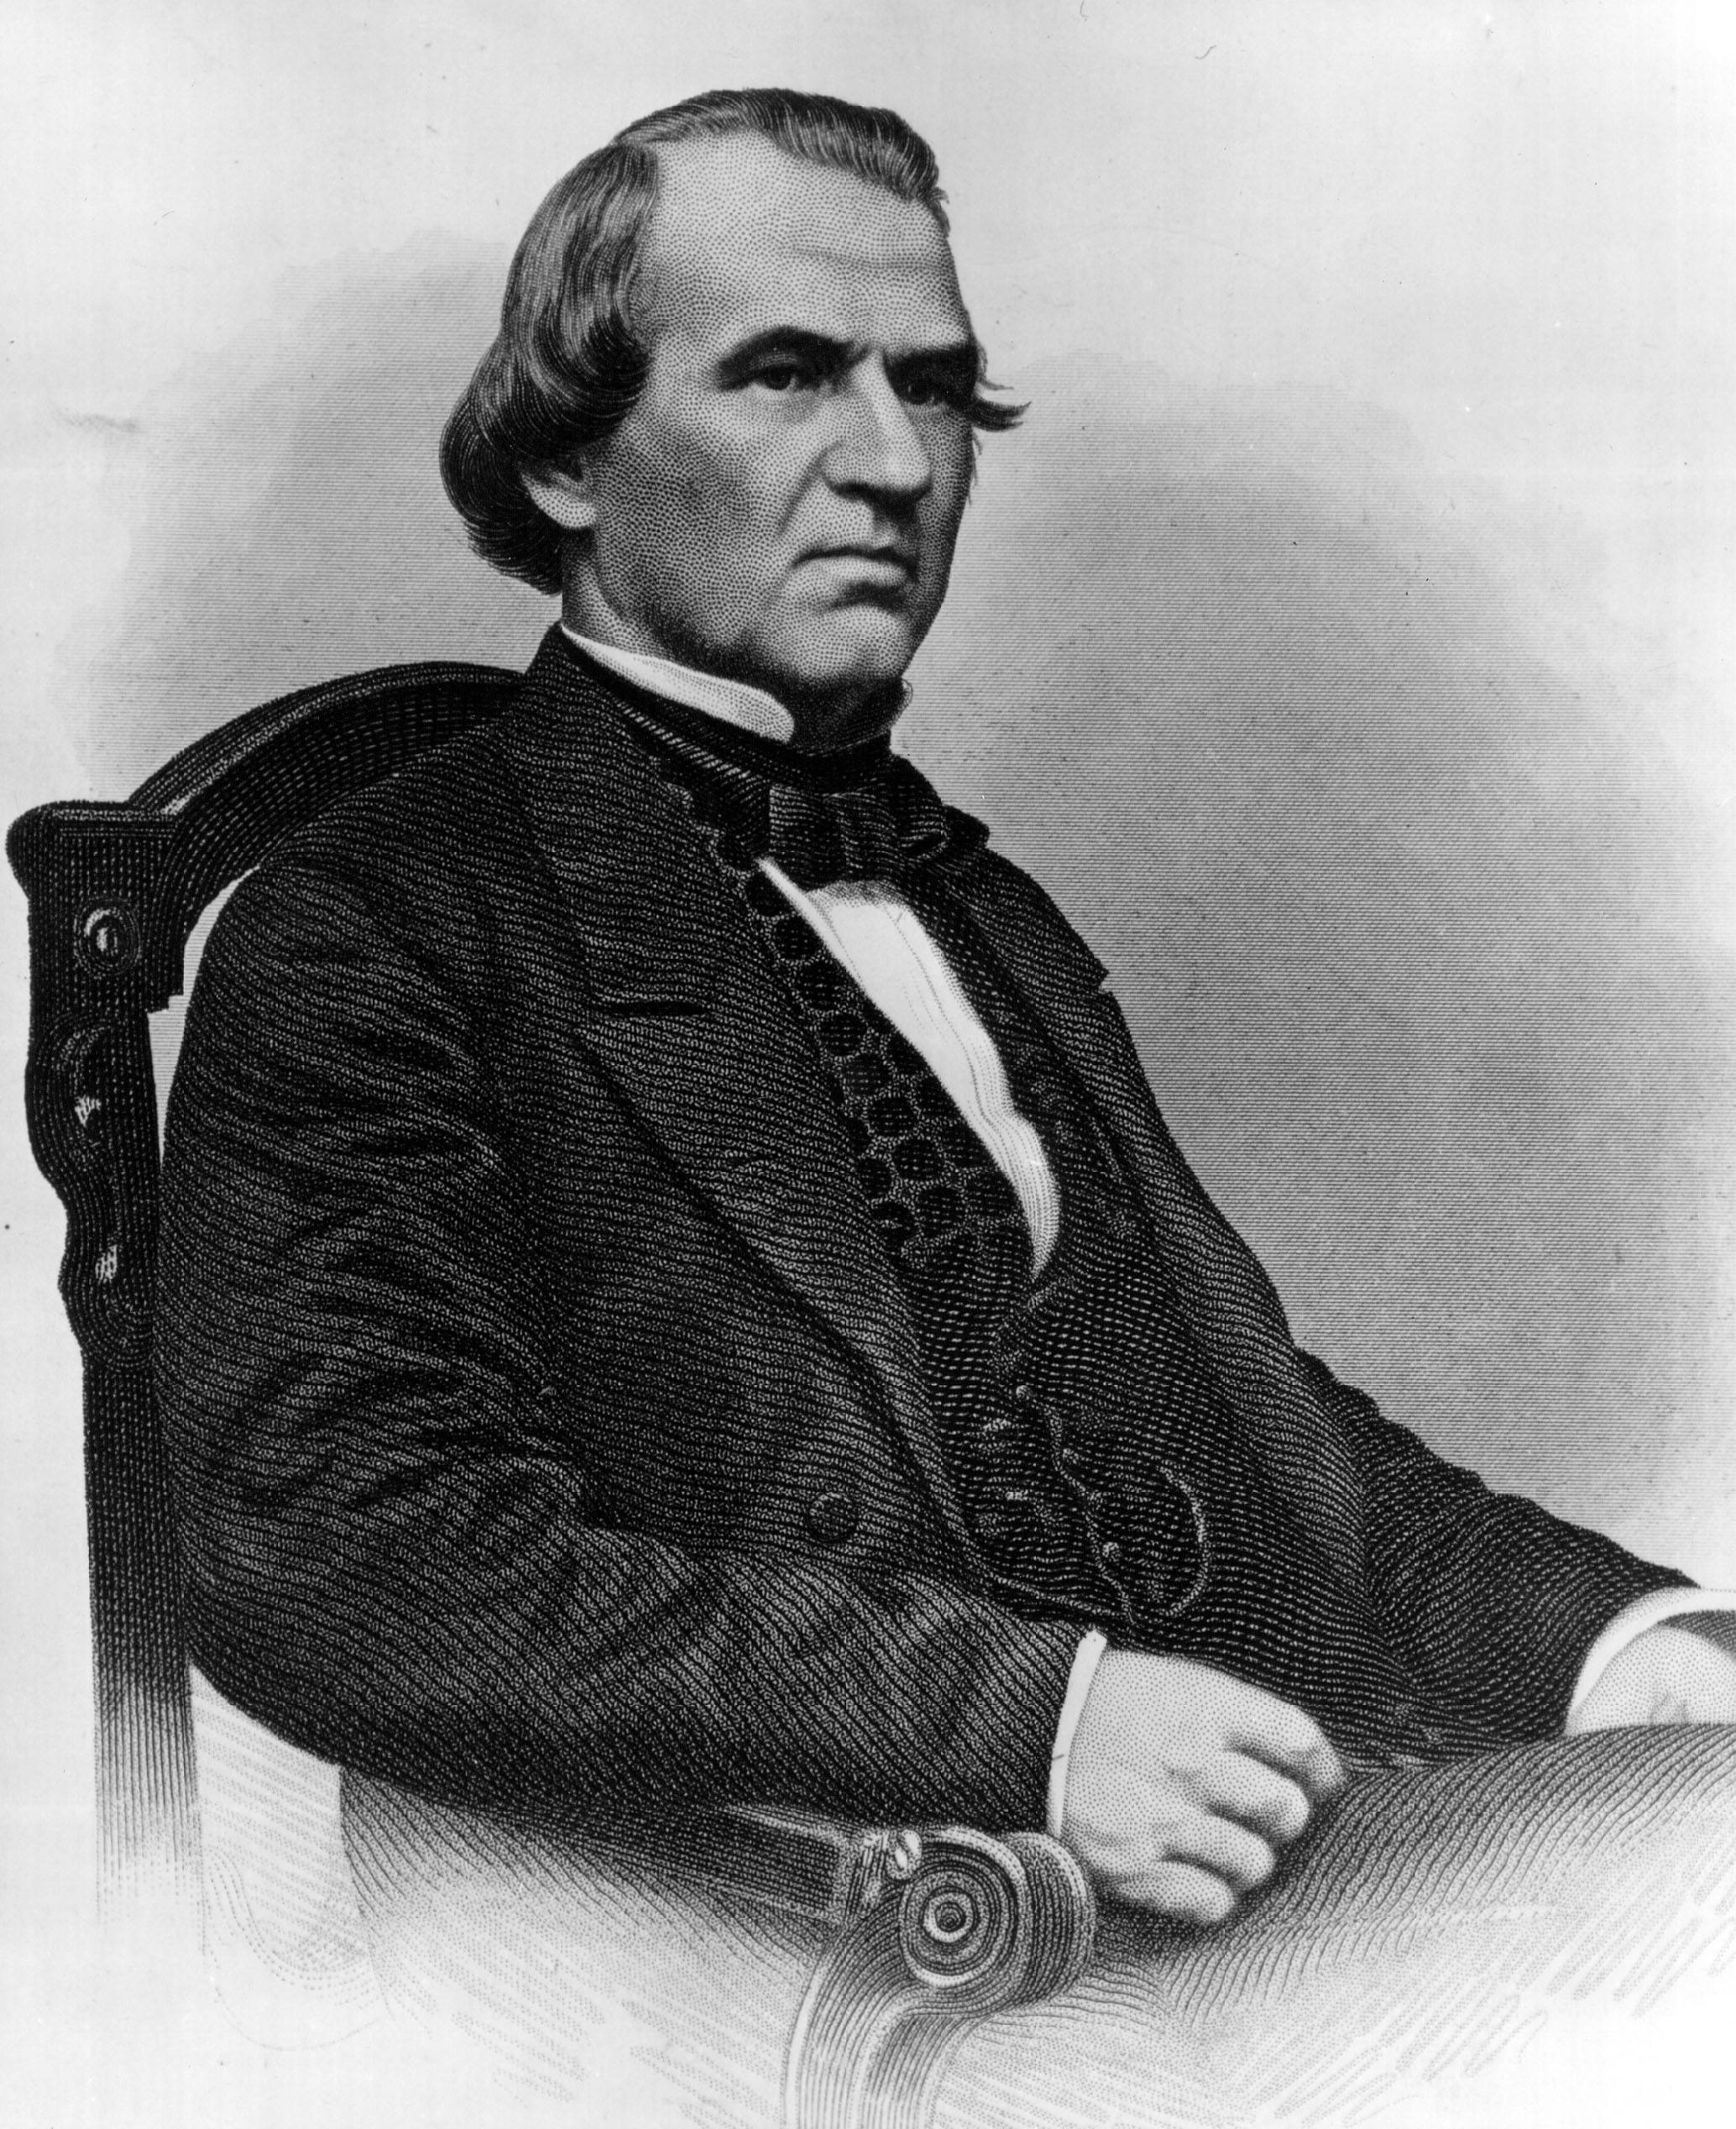 Andrew Johnson, 17th president of the United States